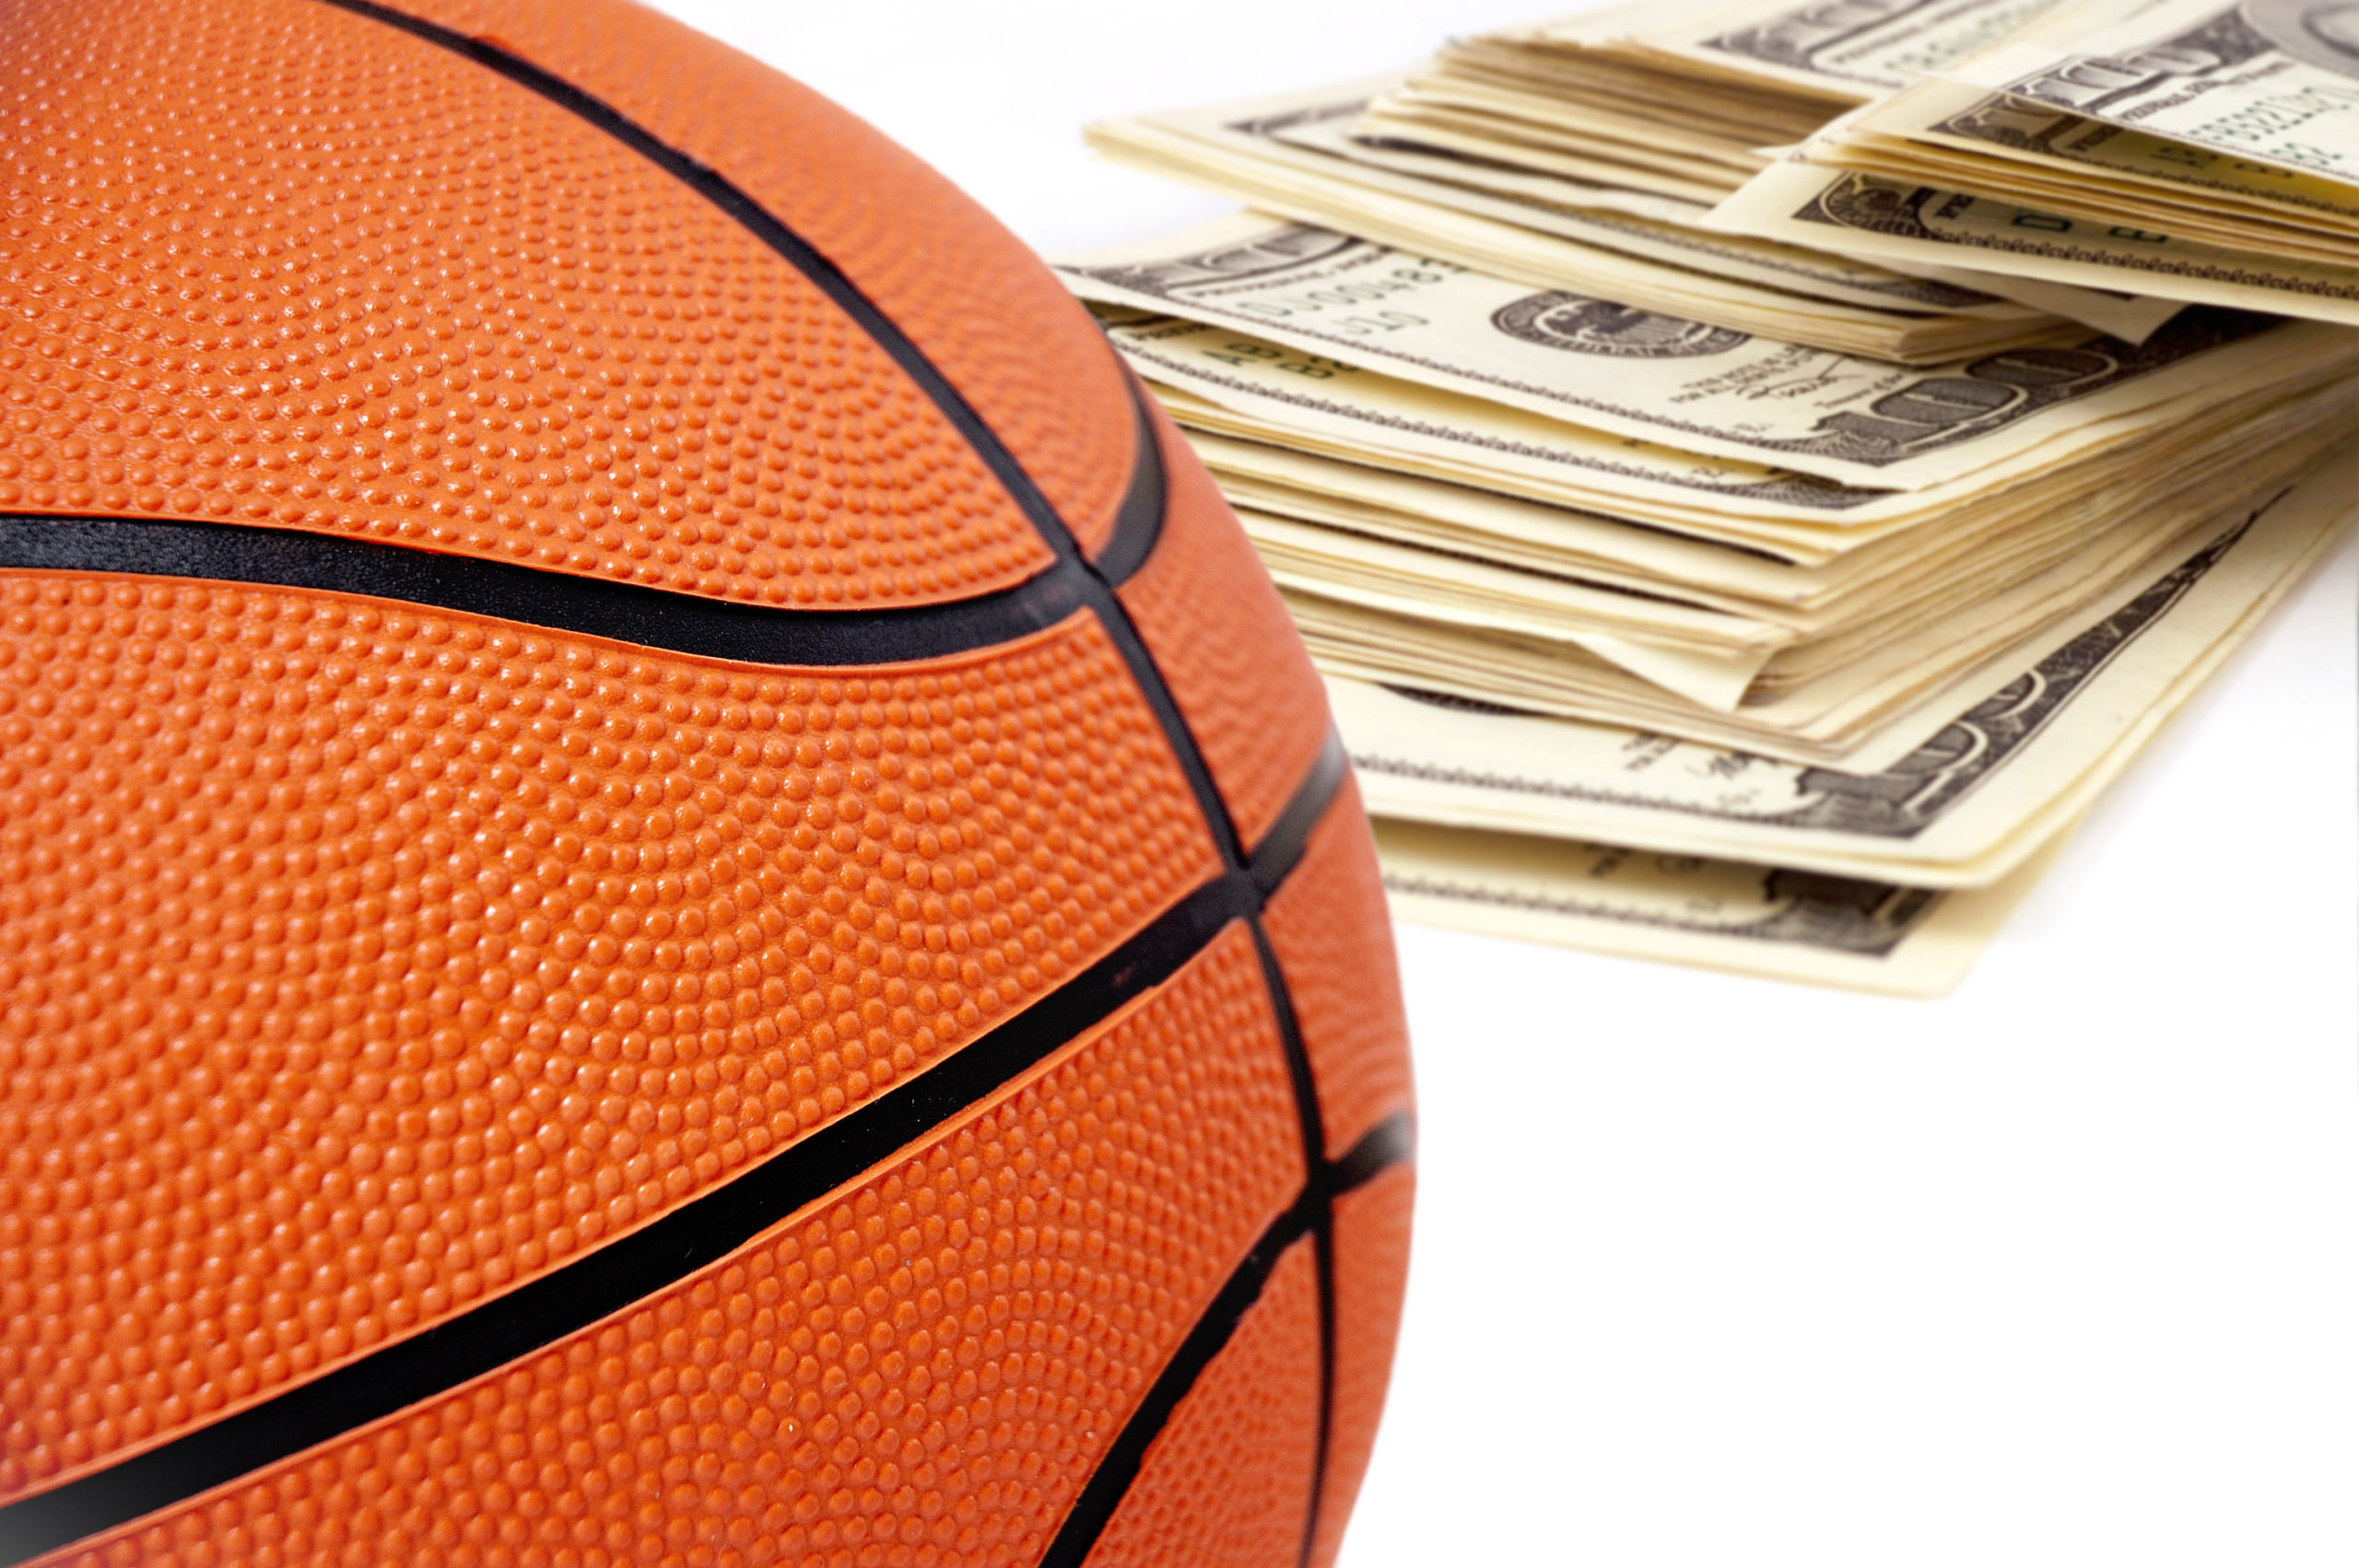 Weekly Economic News Roundup and March Madness NCAA gender inequality